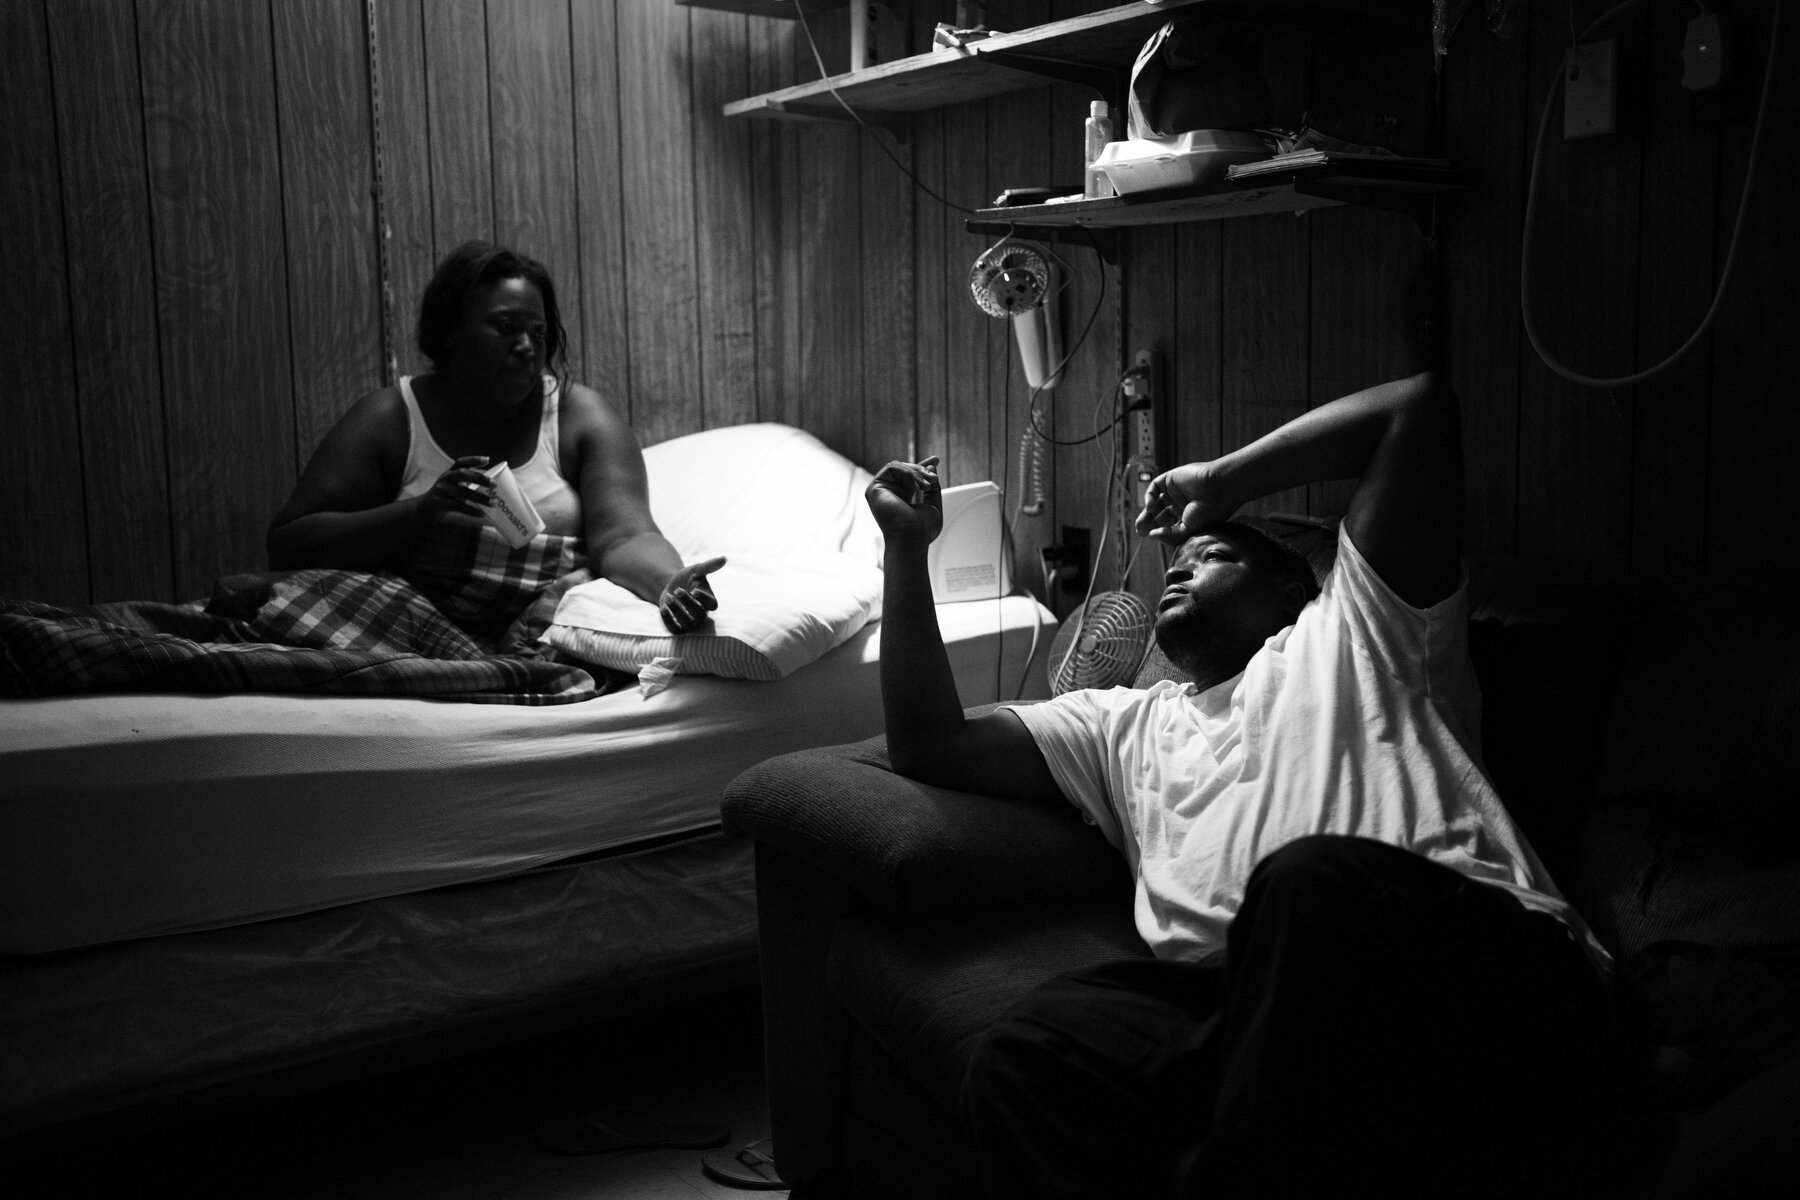  Jaleesa Coleman and David Glasper chat in the back break room at the Quitman County Ambulance Service in Marks, MS. The ambulance service did not have an actual ambulance until 1976, using hearses for years with no formal medical training, but even 